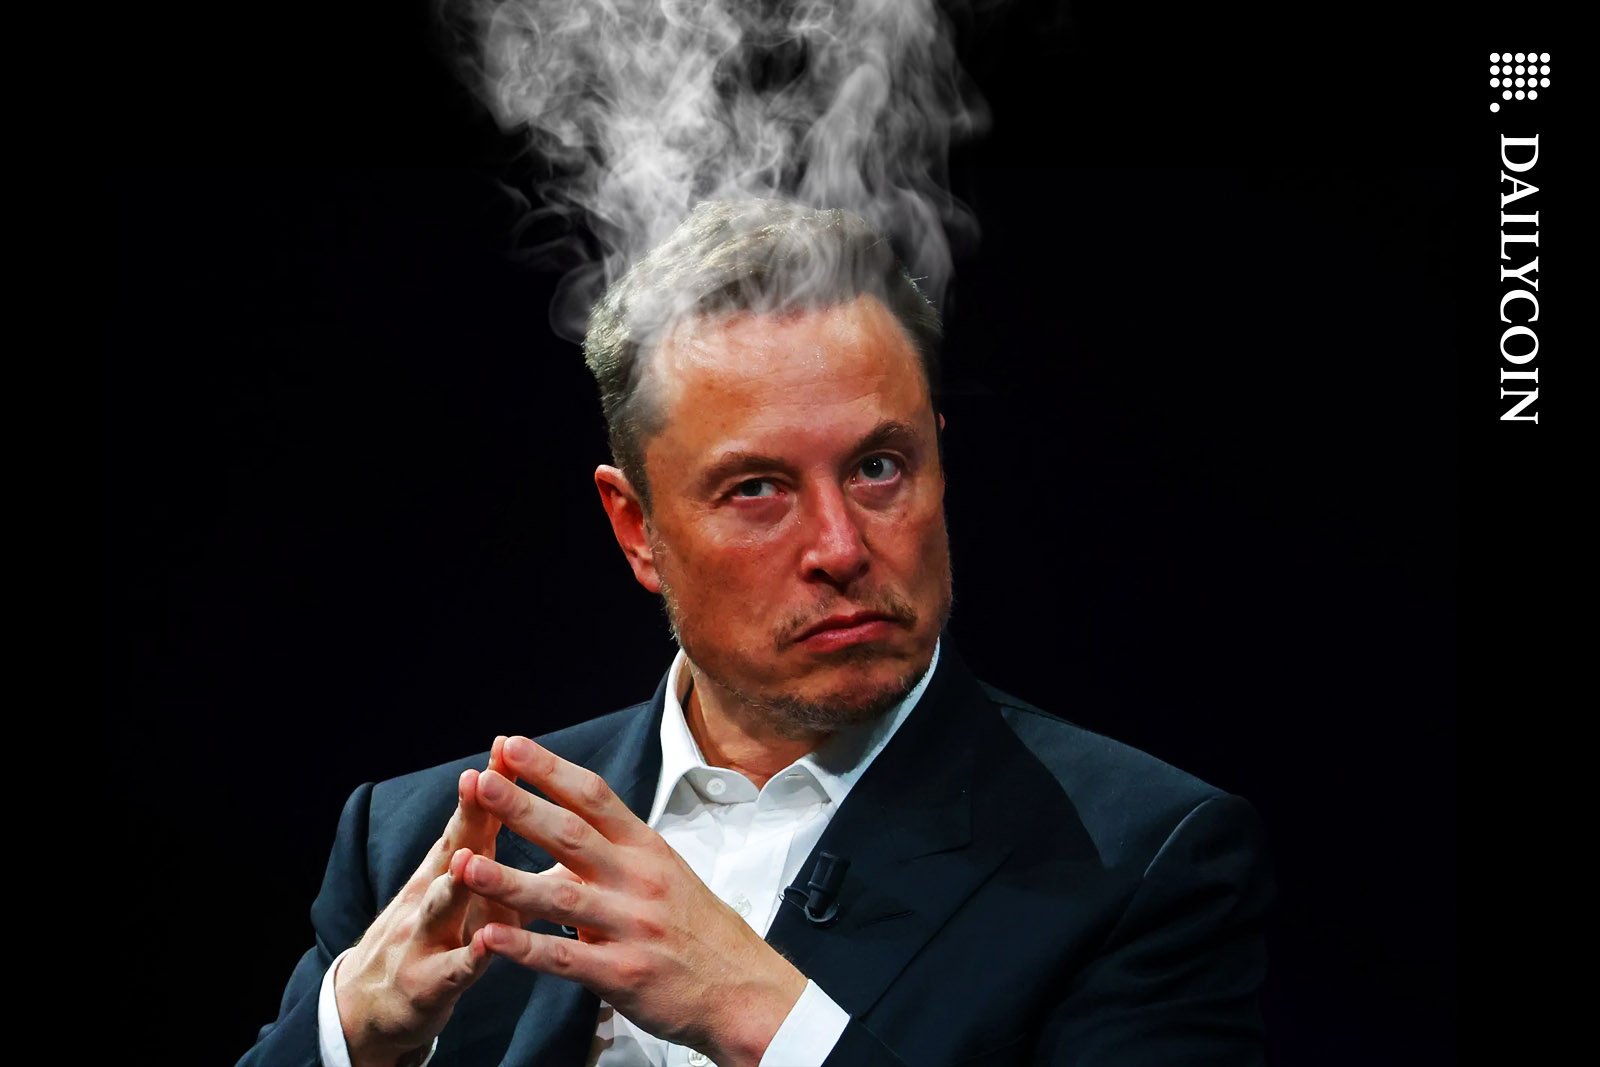 Elon Musk is red with anger and steam coming off his head.